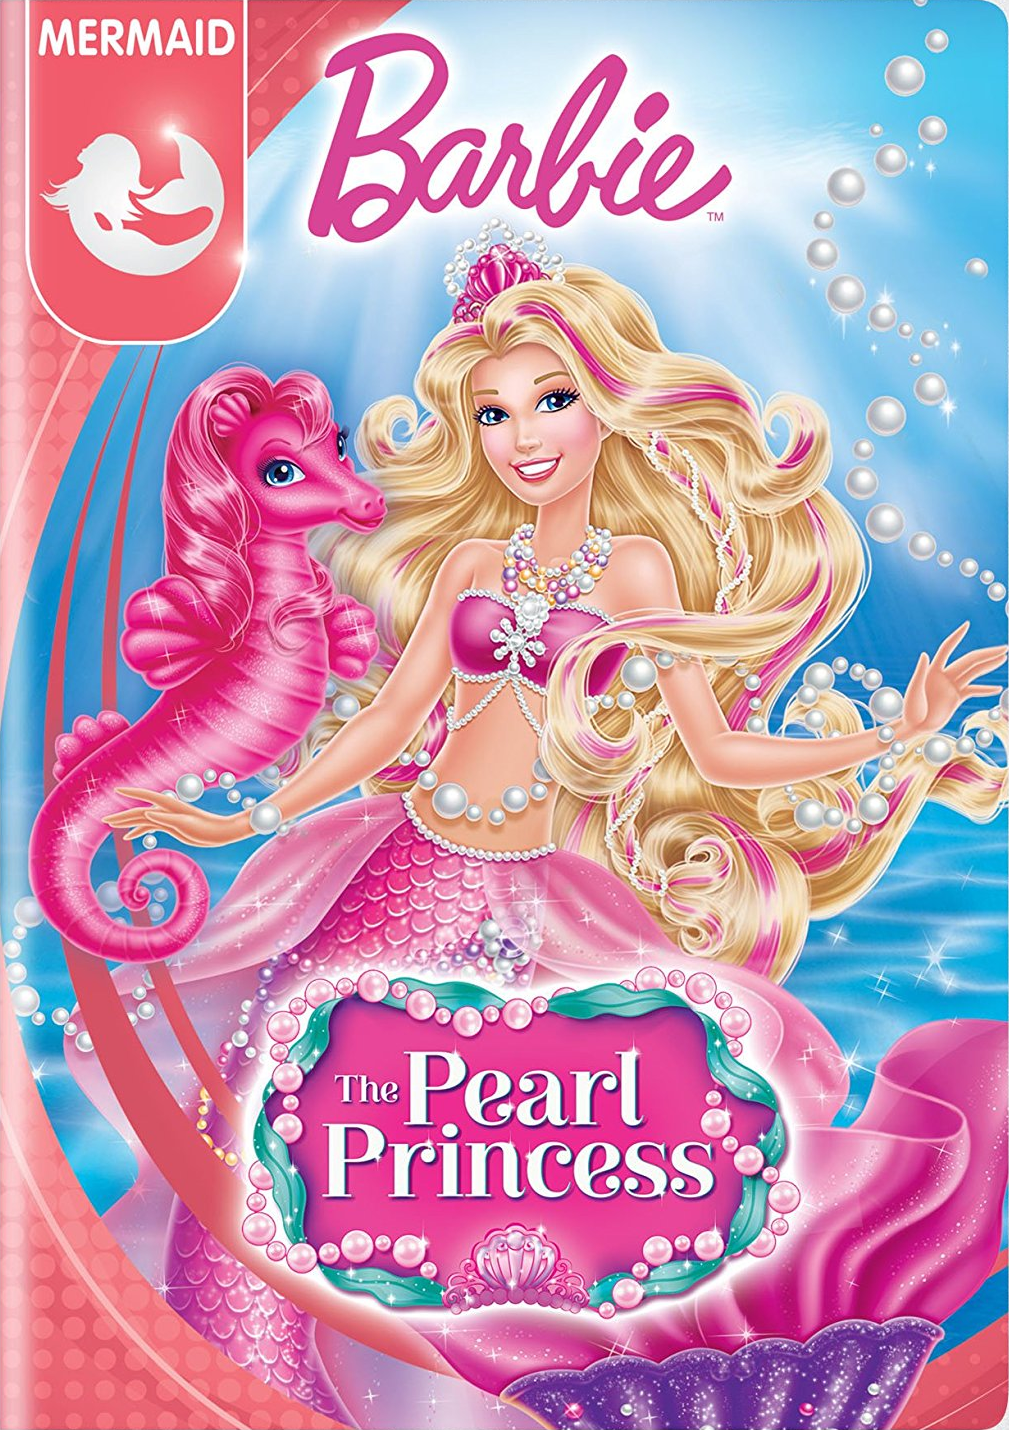 barbie and the pearl princess full movie